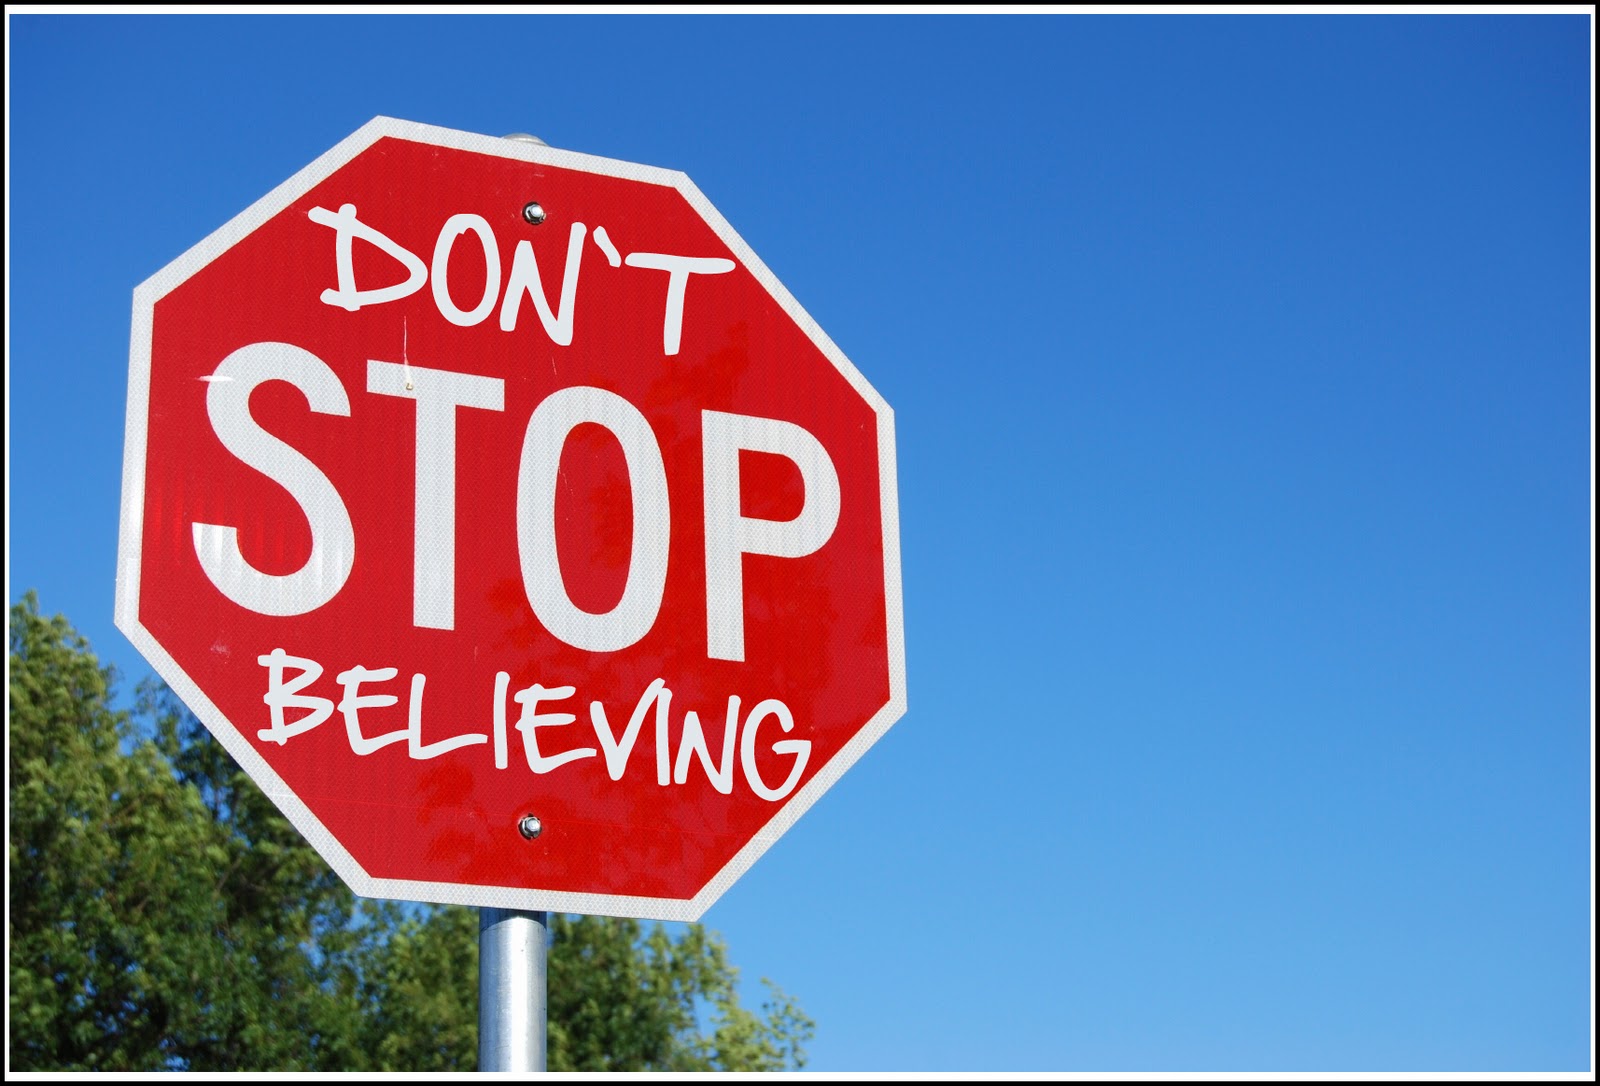 Don't stop believing ect. 